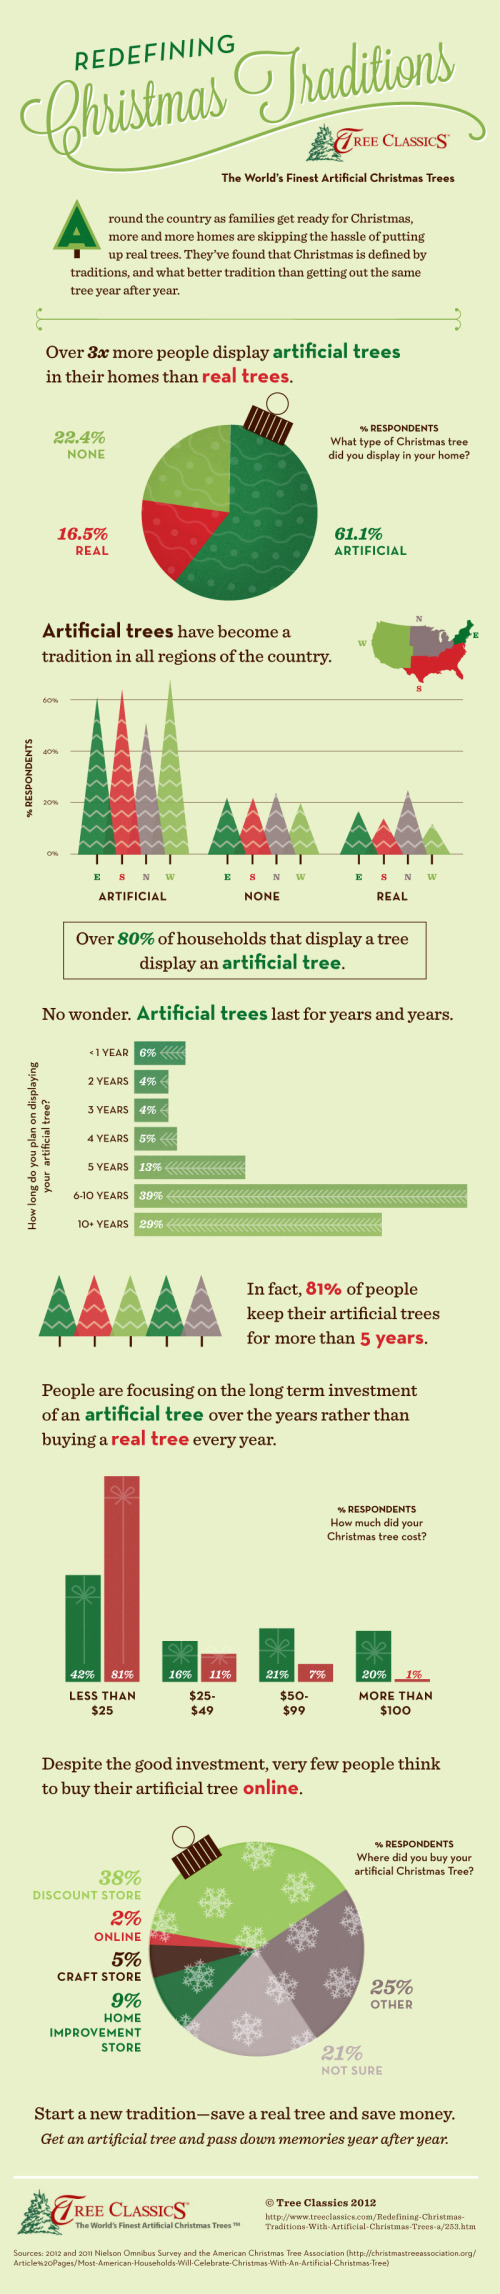 The New Christmas Tradition...Artificial Christmas Trees! infographic